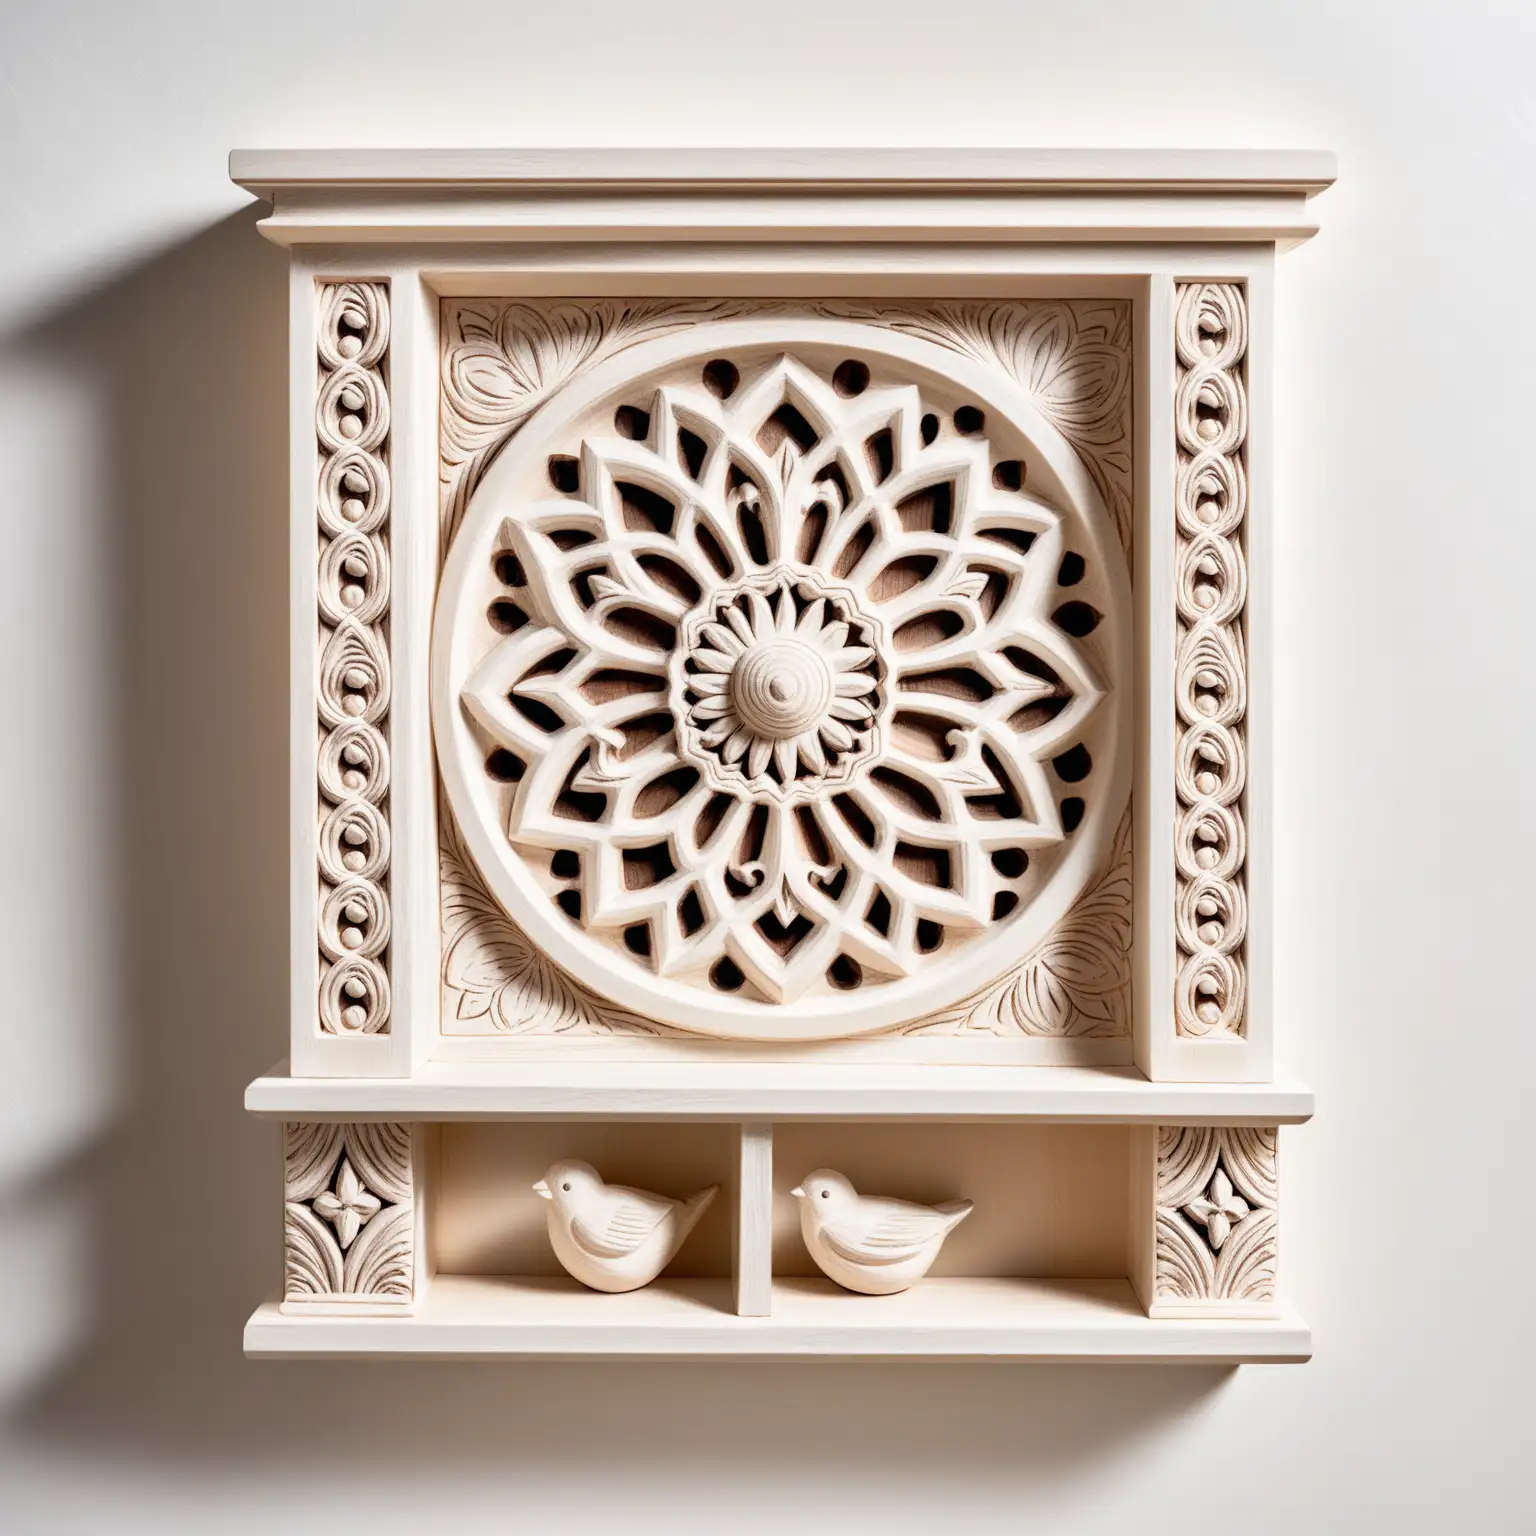 Elegant Whitewashed Wall Storage with Carved Accents